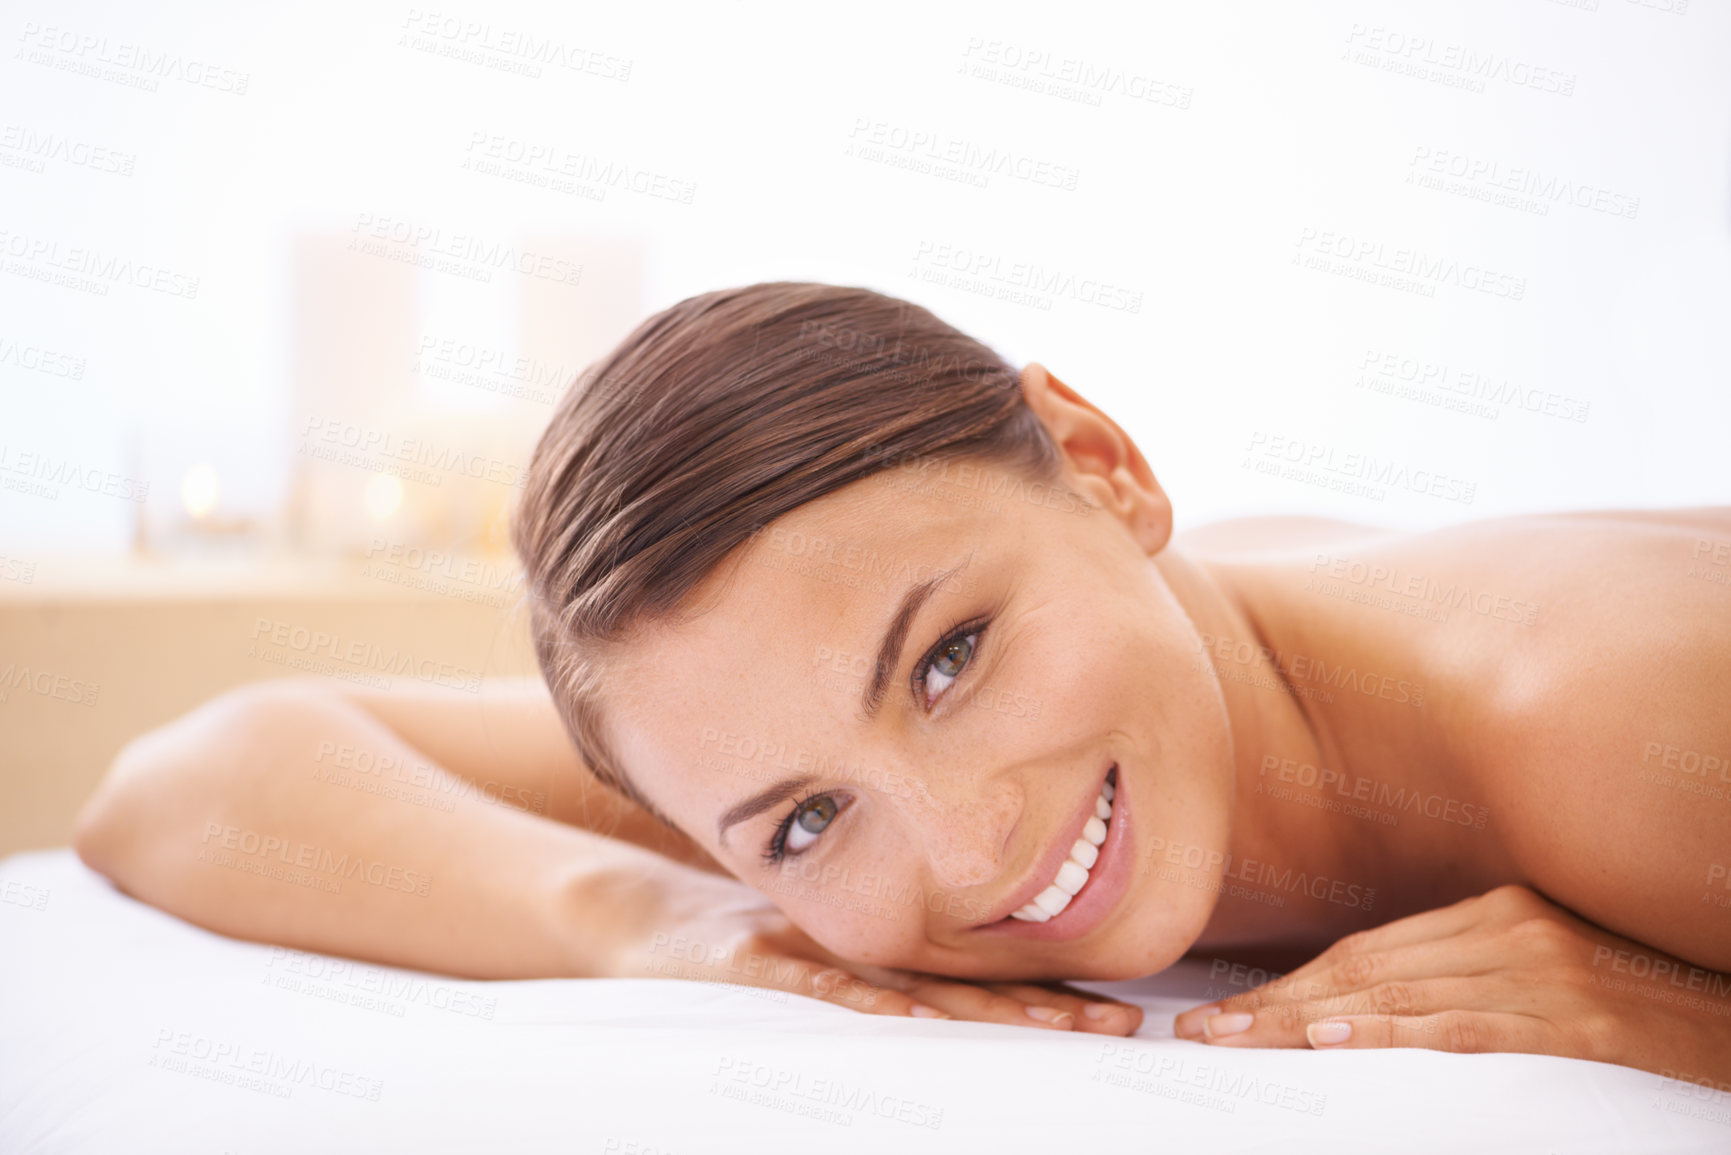 Buy stock photo Relax, self care and young woman at spa with body massage for health, wellness and pamper. Happy, natural and female person with calm, peaceful and serene skin therapy treatment at beauty salon.